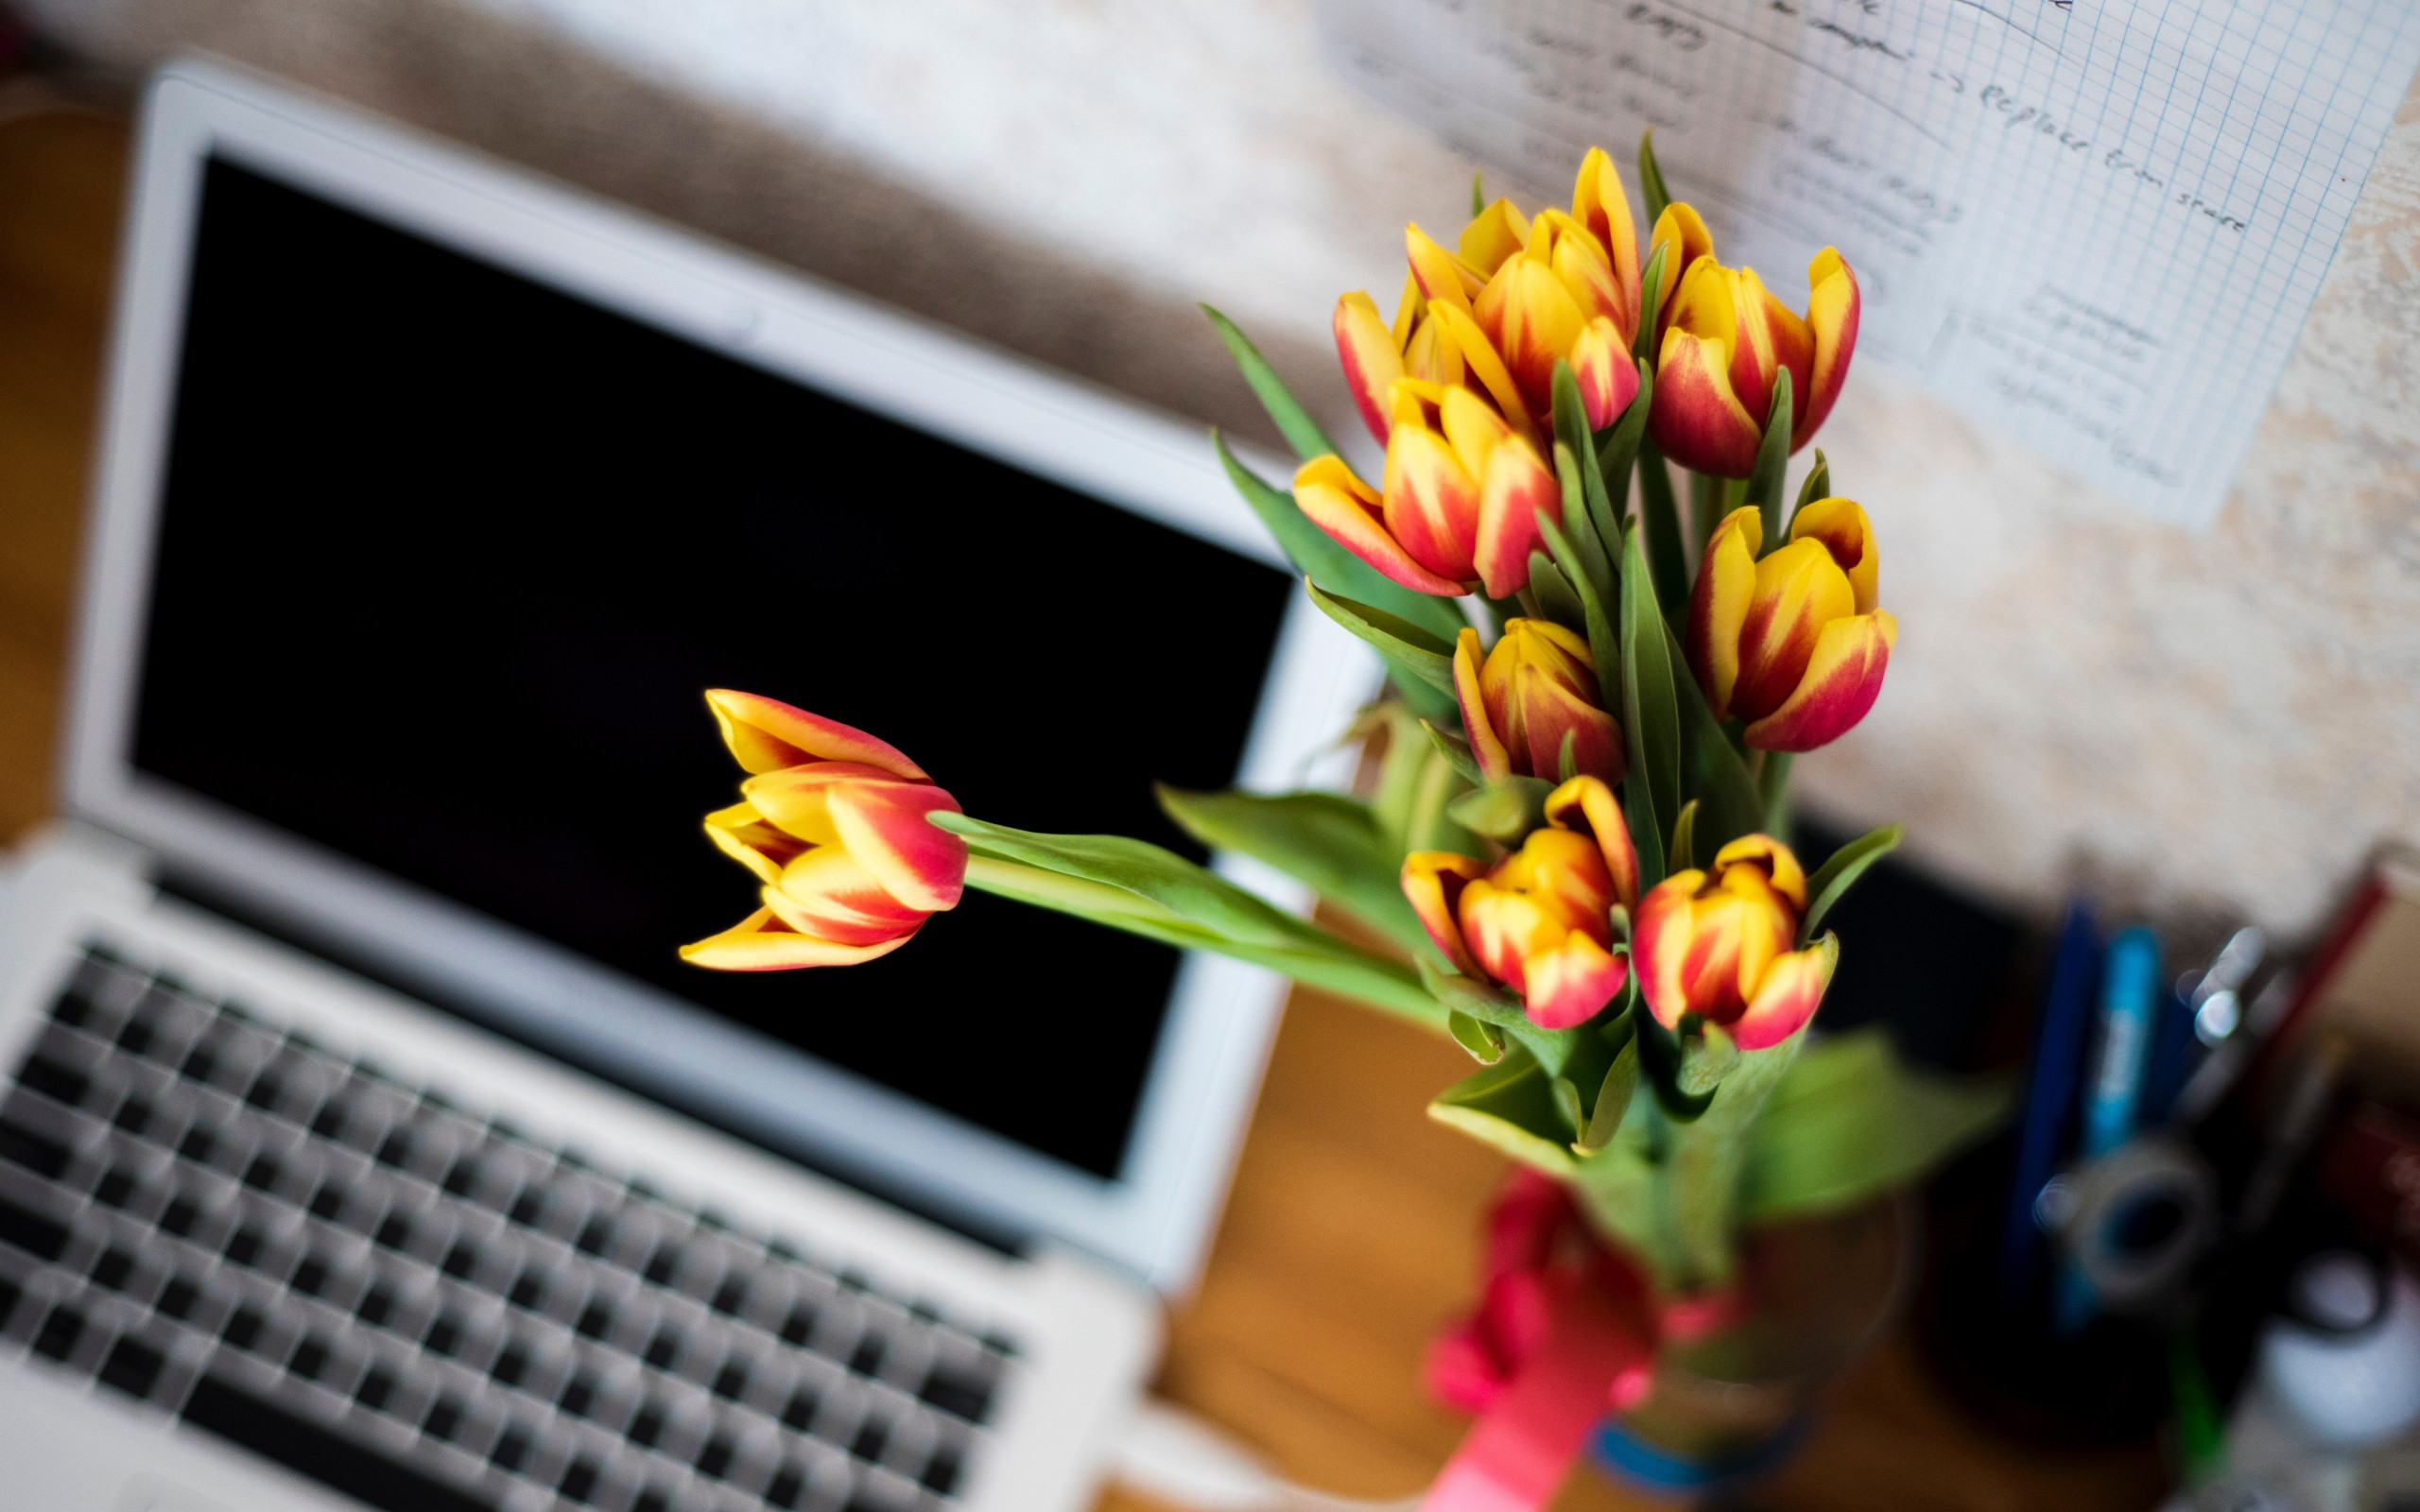 Laptop and tulips bouquet wallpaper 2560x1600